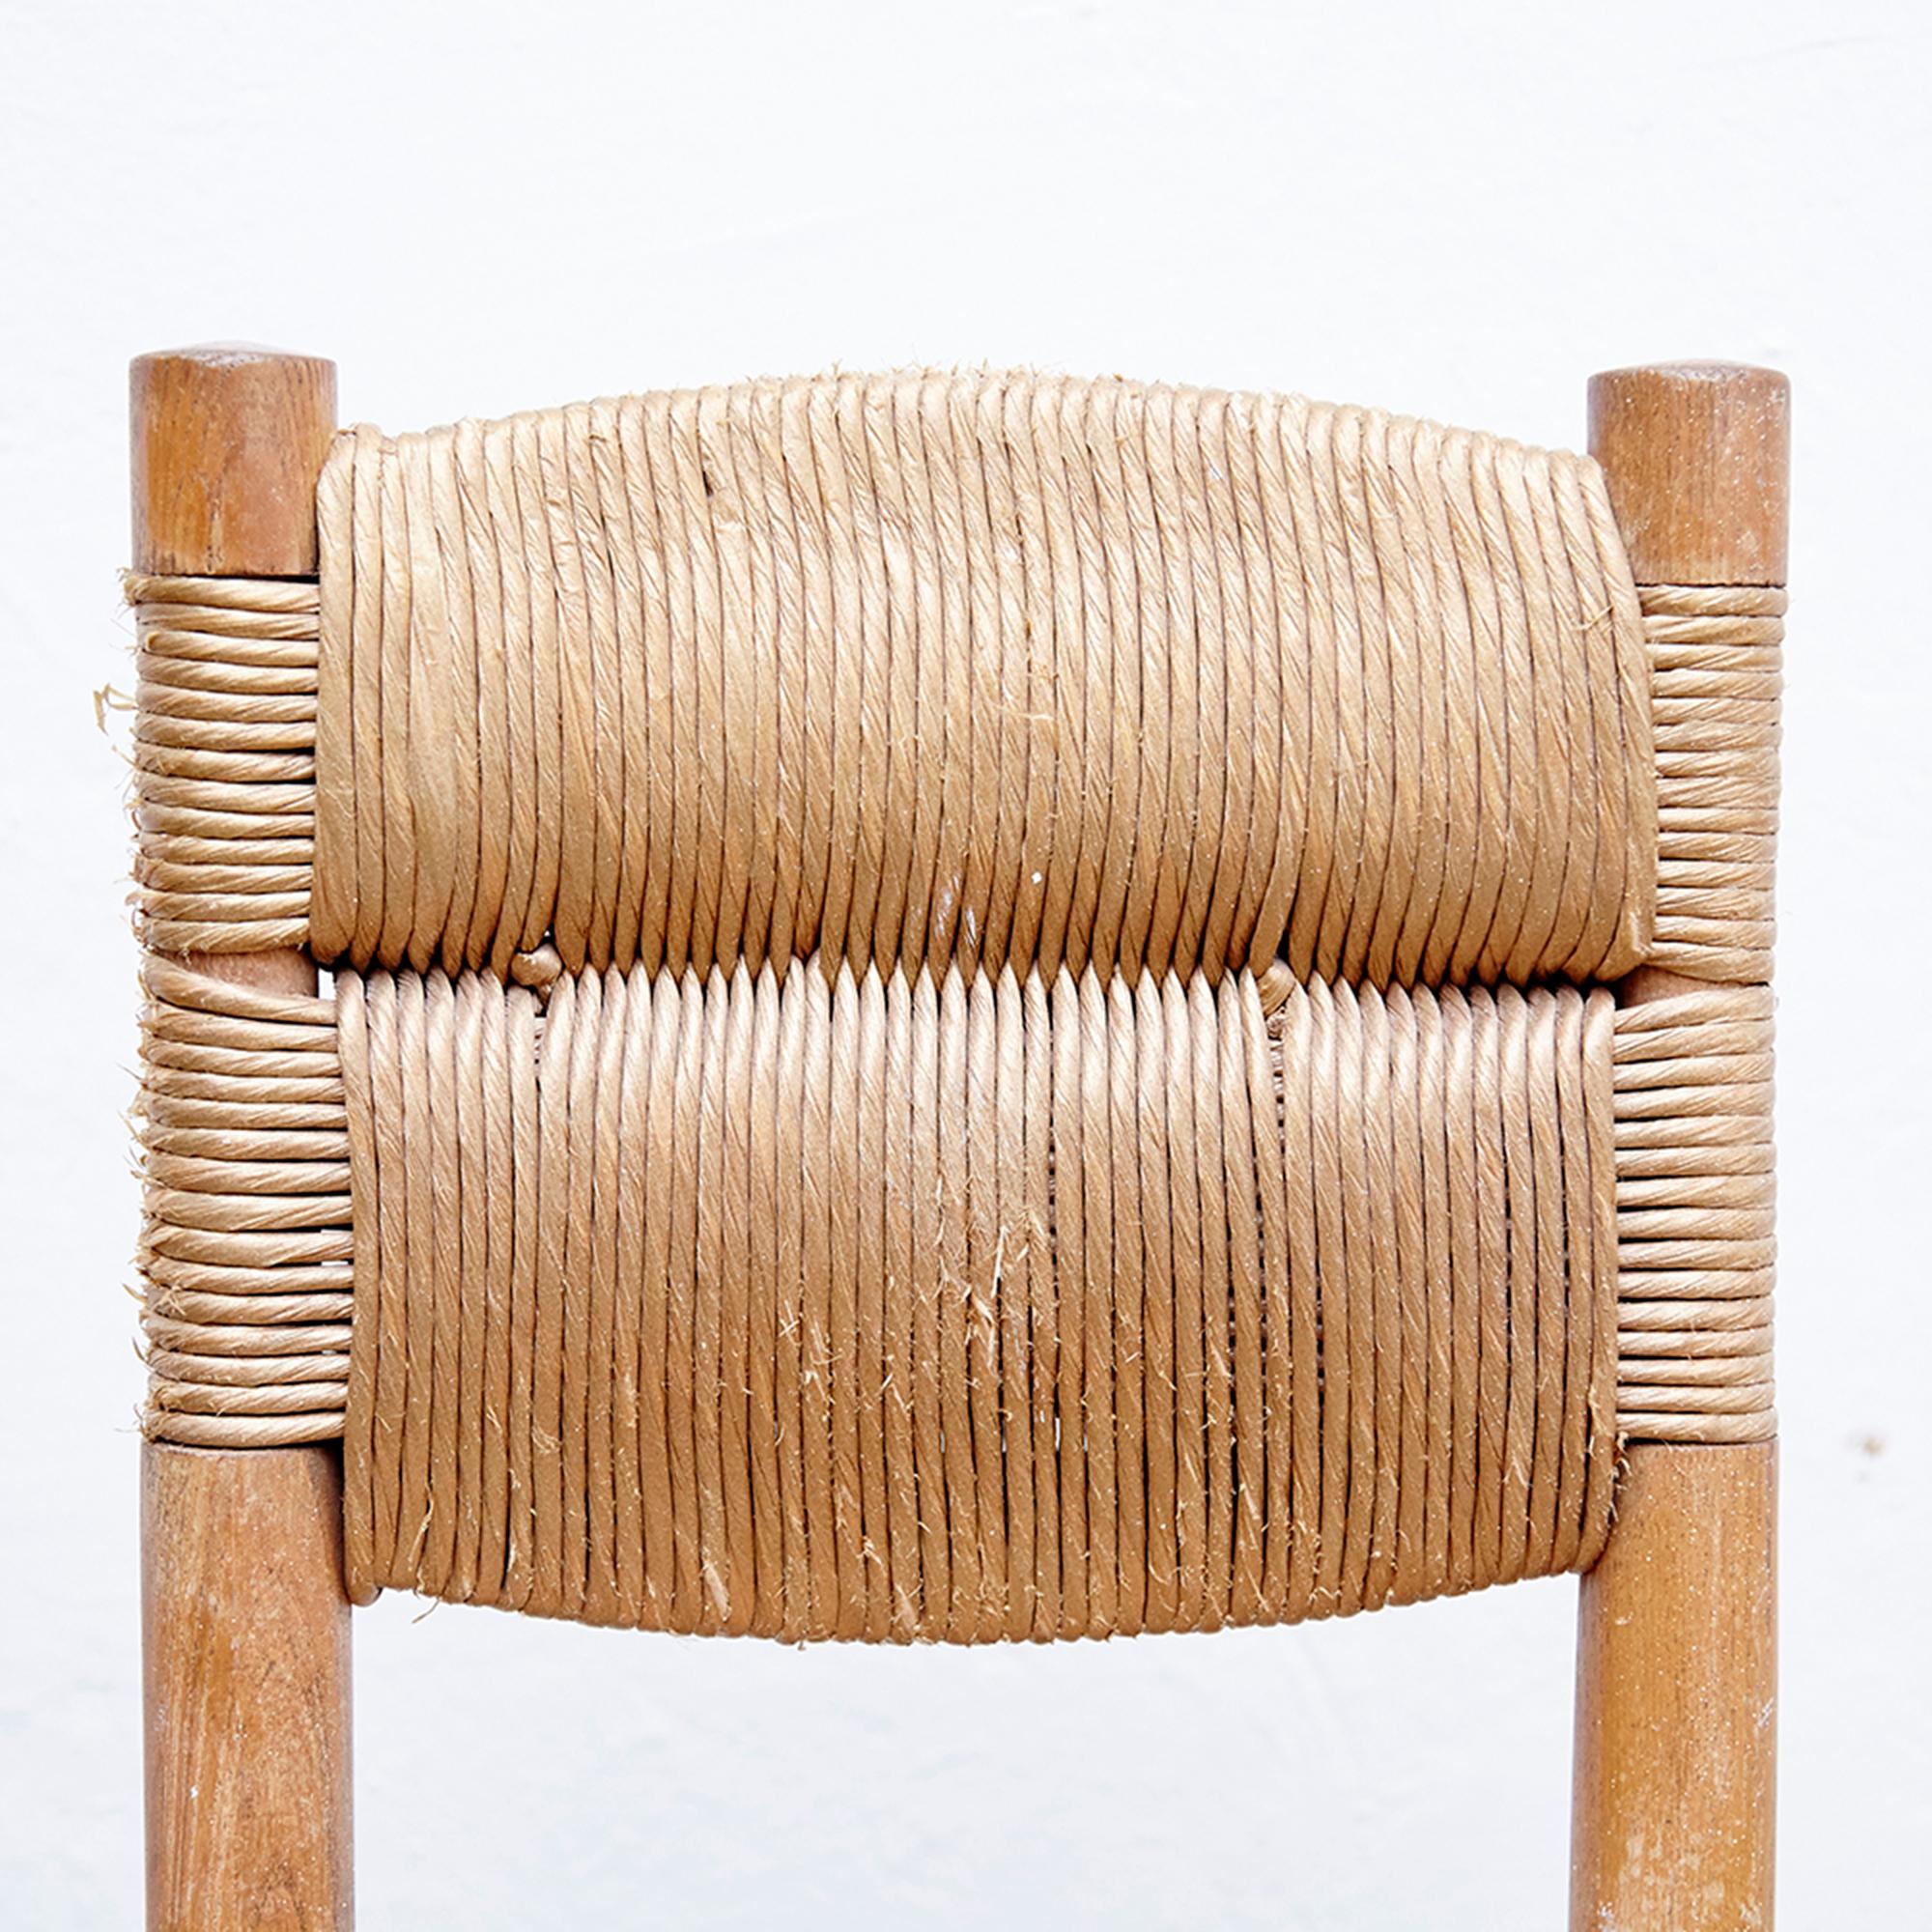 Rattan Set of Four Charlotte Perriand Chairs, circa 1950